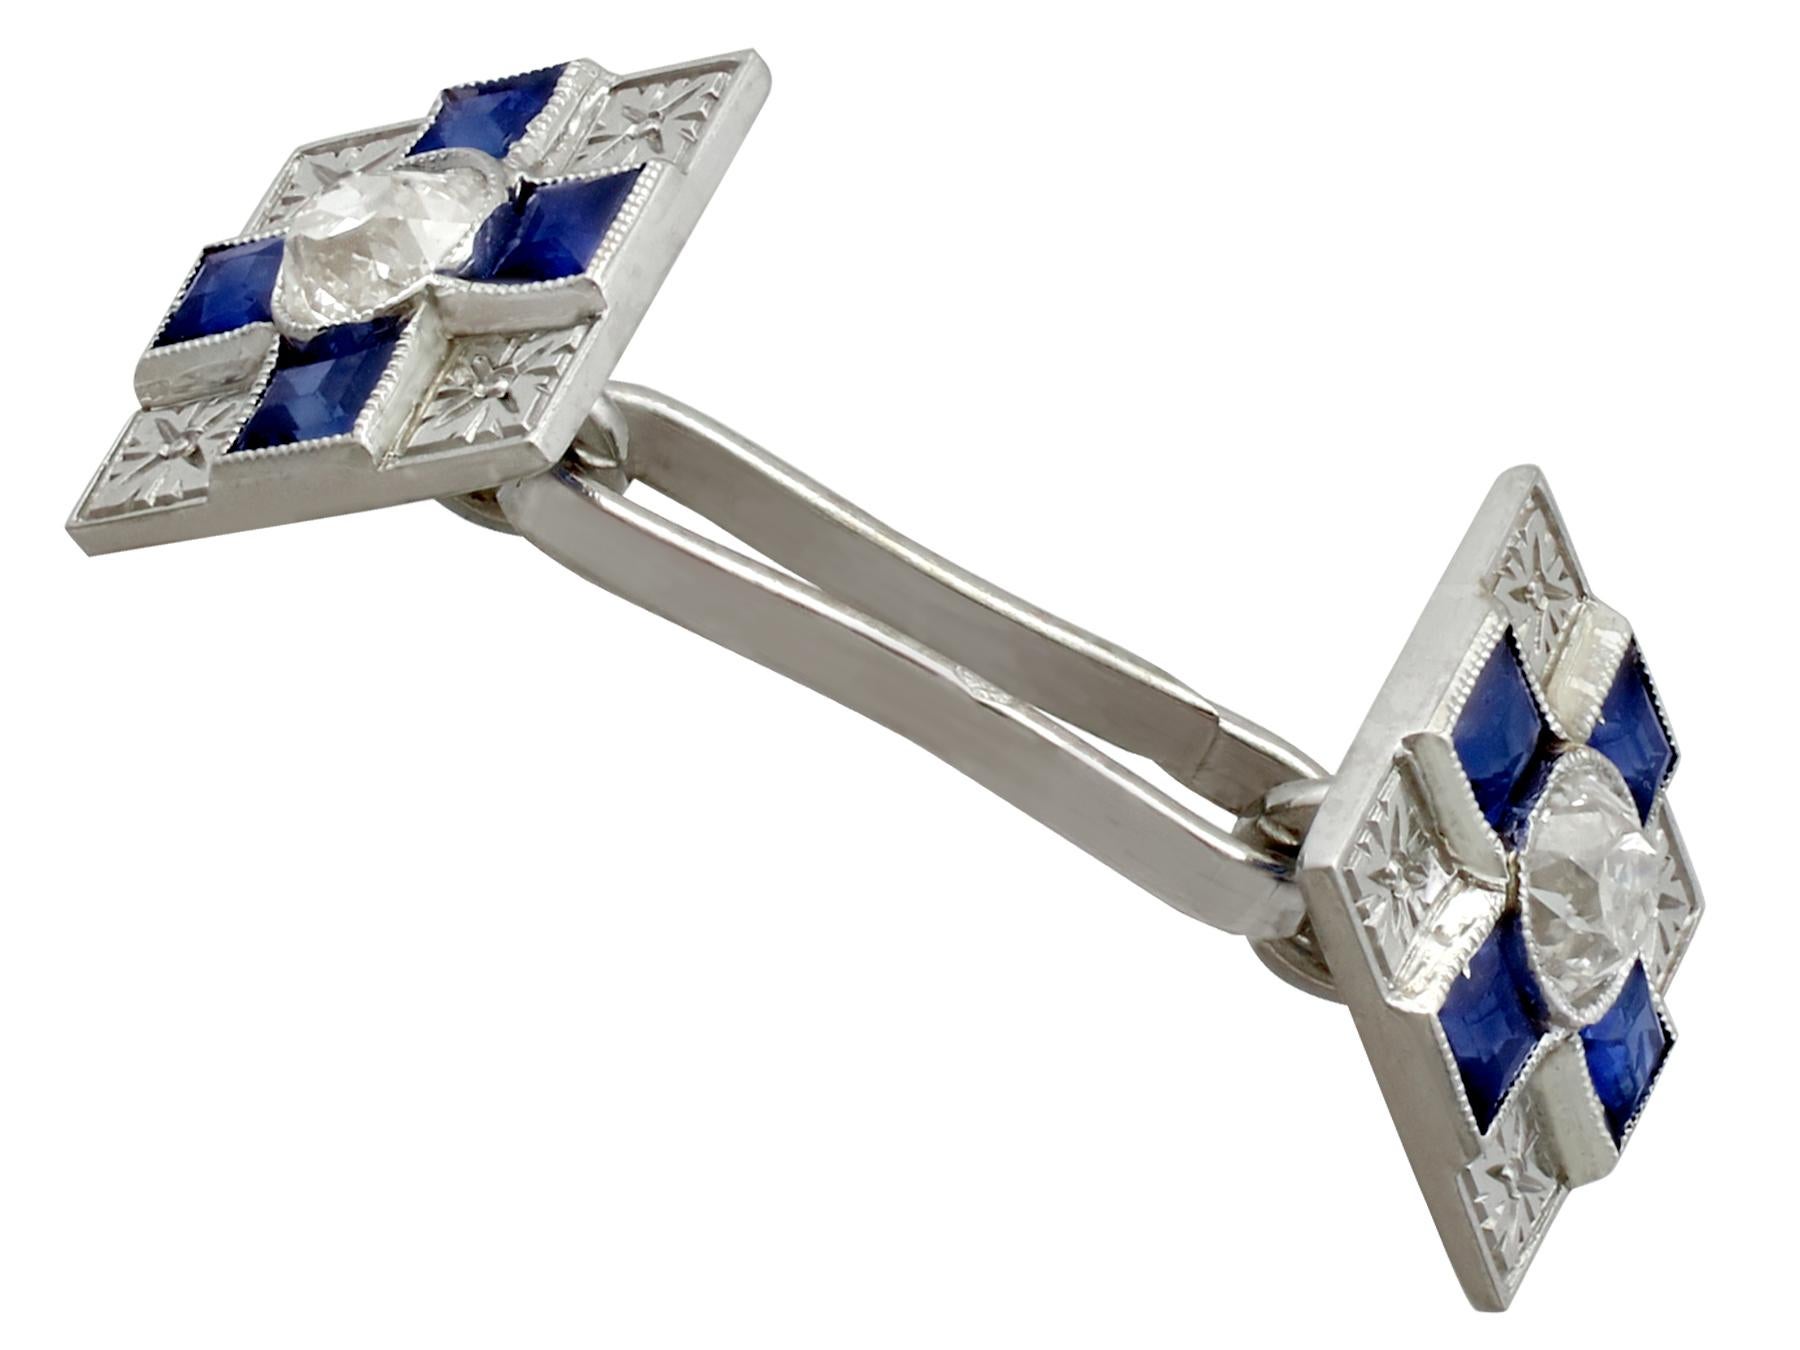 An impressive pair of antique French 0.80 carat sapphire and 1.05 carat diamond, 18 carat white gold cufflinks; part of our diverse antique jewelry collections.

These fine and impressive antique sapphire and diamond cufflinks have been crafted in